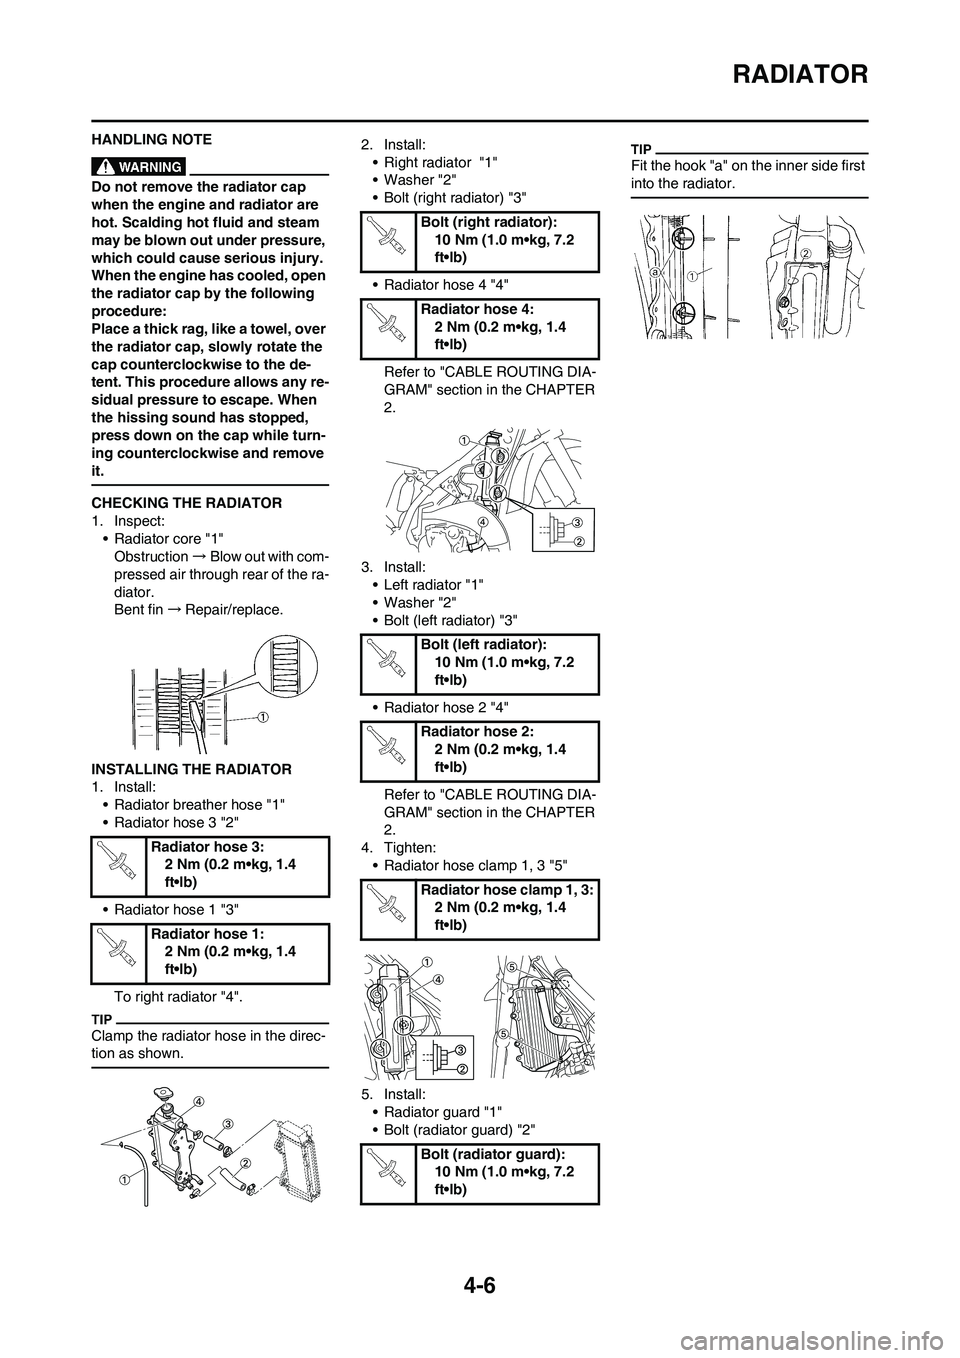 YAMAHA YZ125LC 2010 Owners Guide 4-6
RADIATOR
HANDLING NOTE
Do not remove the radiator cap 
when the engine and radiator are 
hot. Scalding hot fluid and steam 
may be blown out under pressure, 
which could cause serious injury. 
Whe